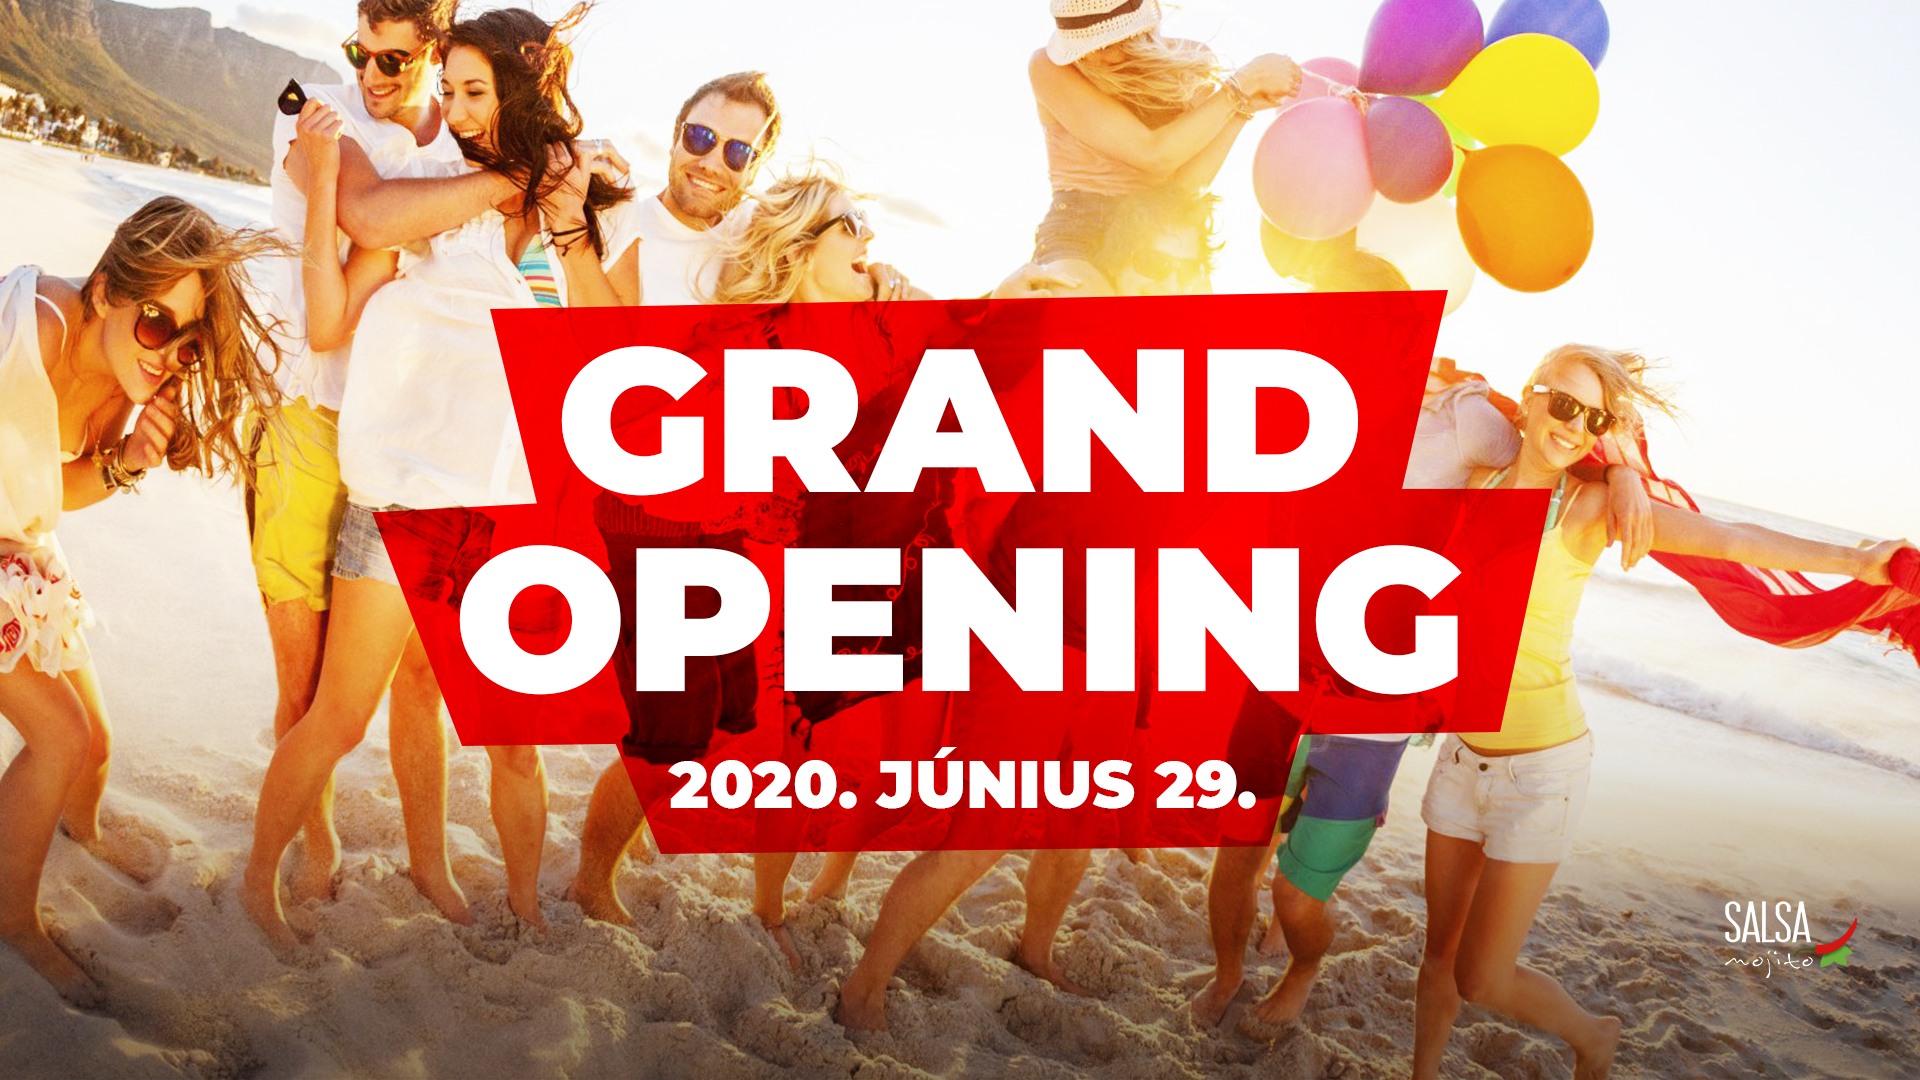 Grand Opening 2020 fin